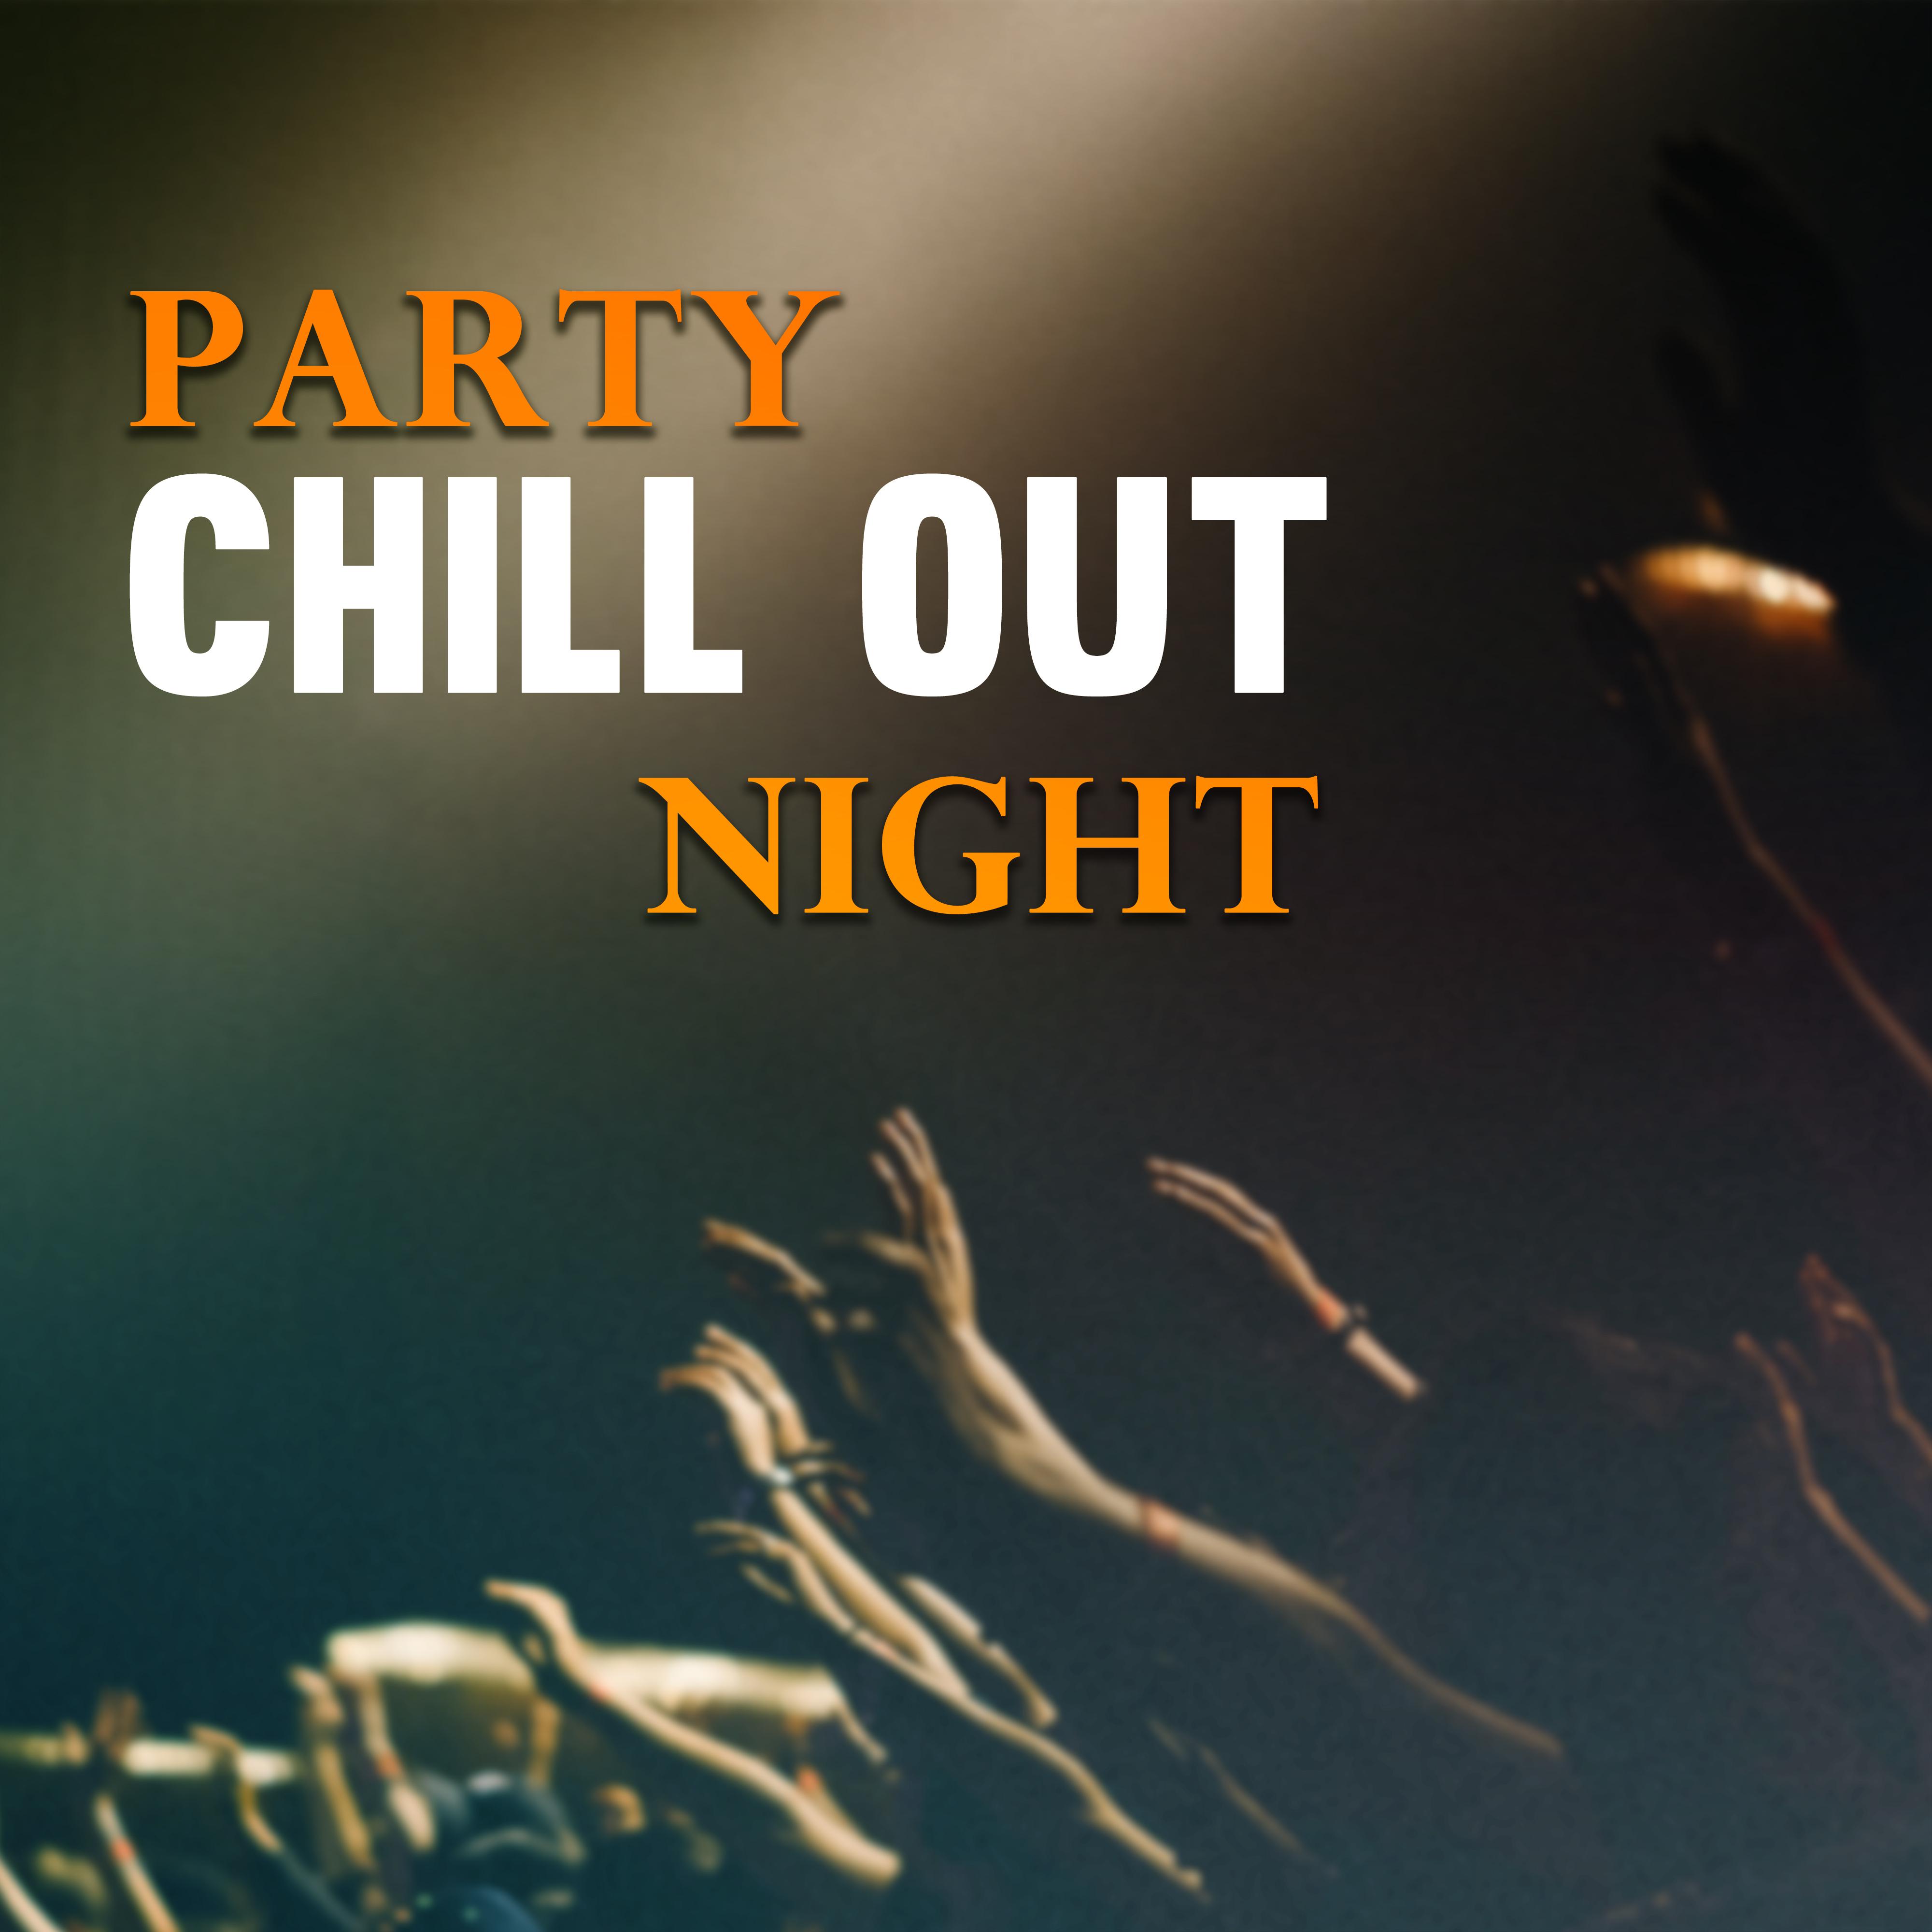 Party Chill Out Night